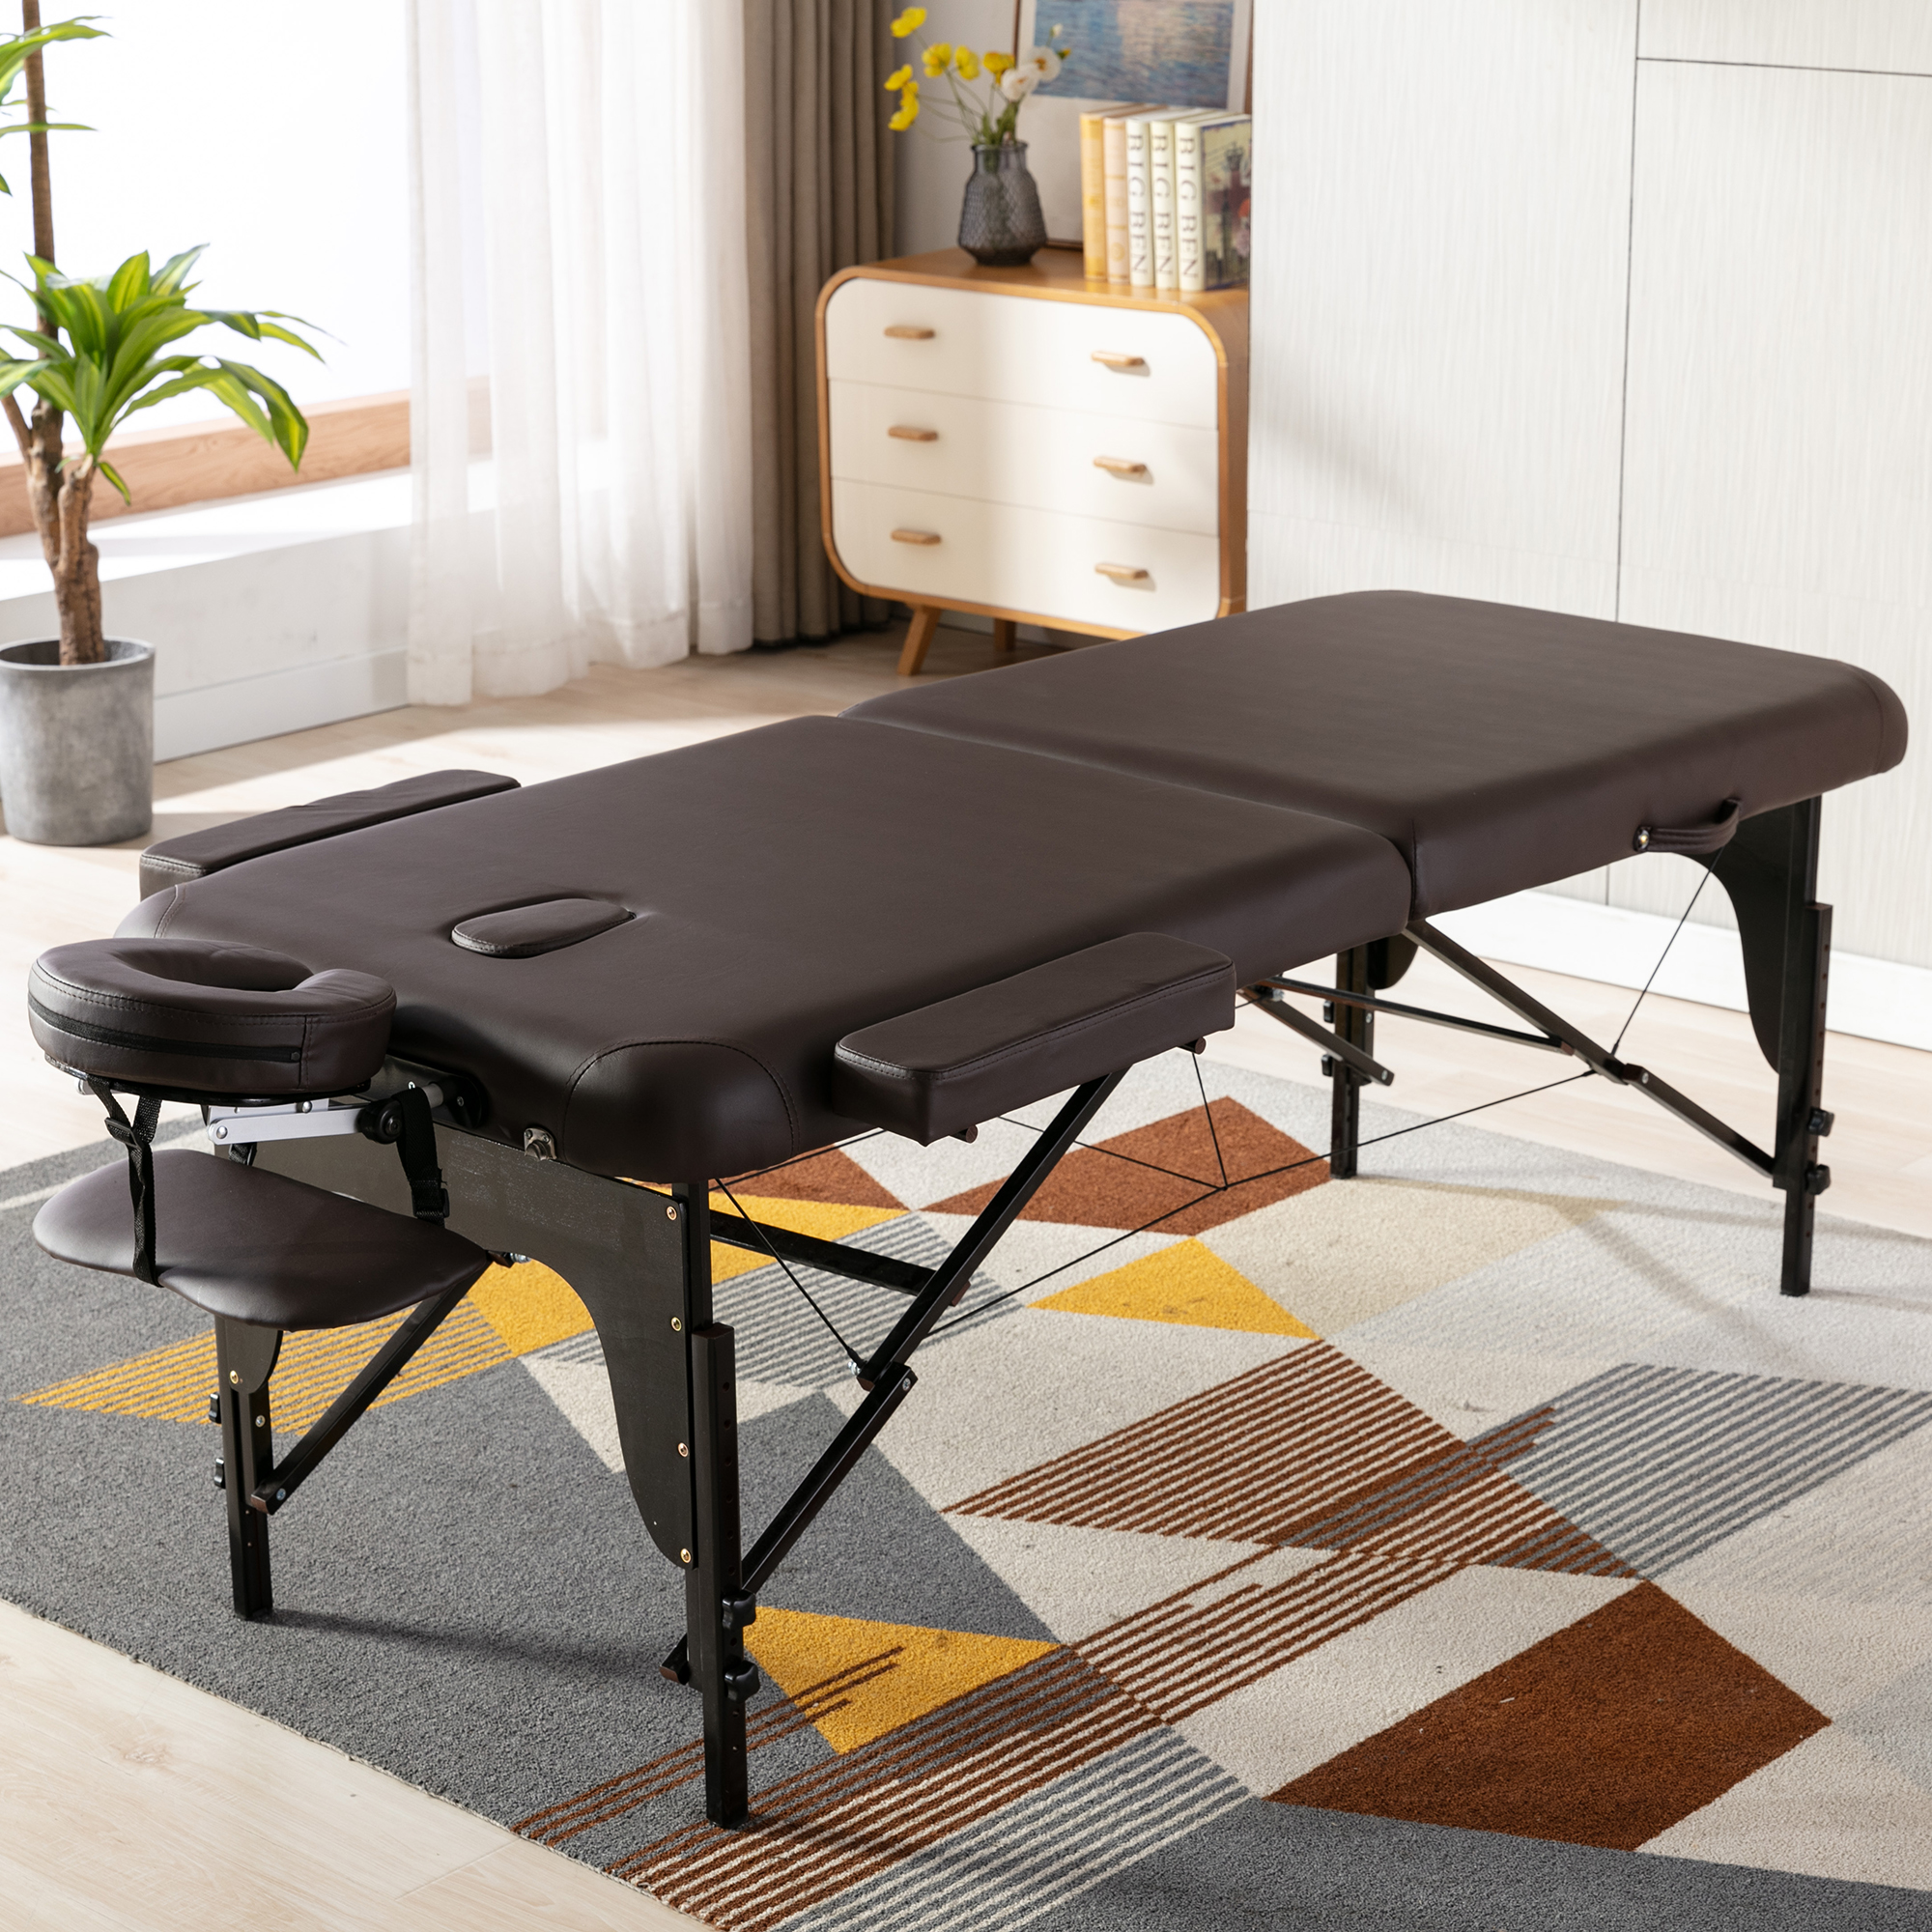 HengMing  Portable Massage table 29 Inchs Wide PU  leather，2 Section Wooden Adjustable Folding Massage Bed With Carrying Case-Boyel Living